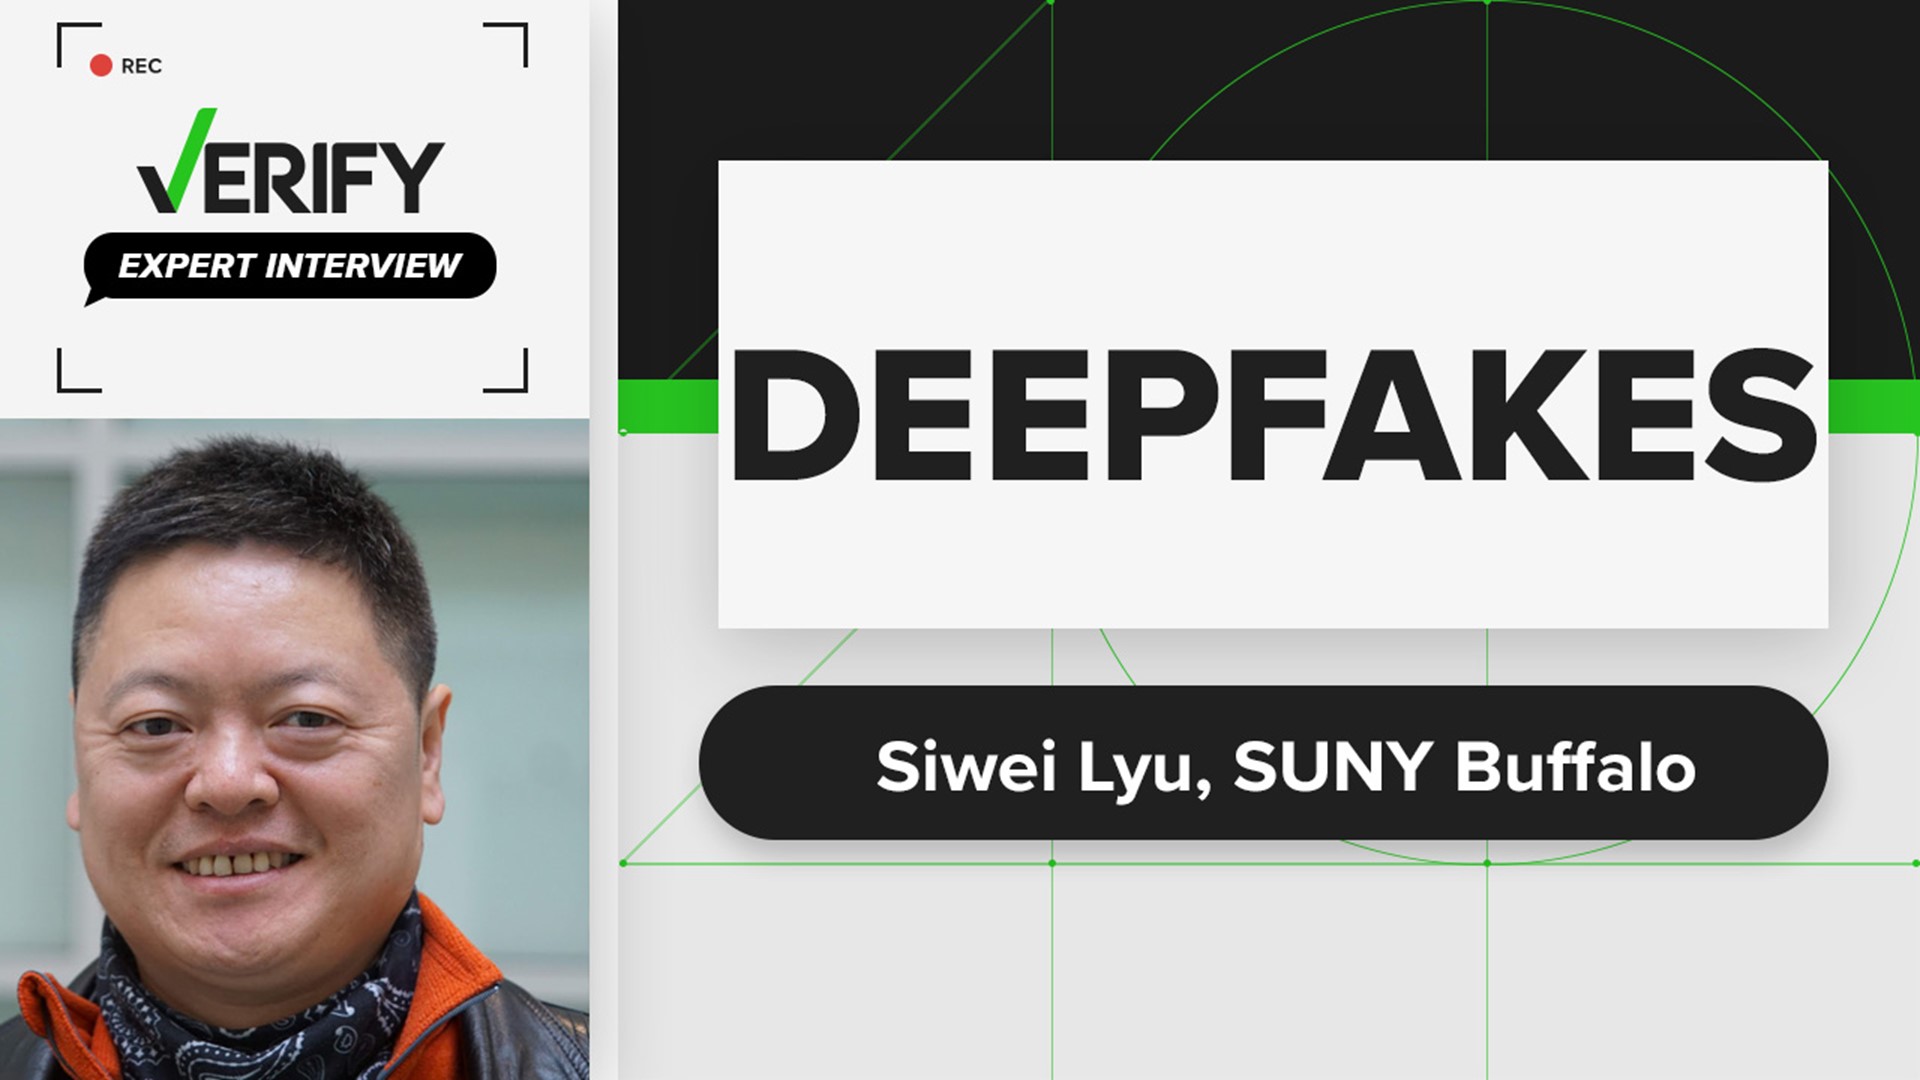 Siwei Lyu discusses the art of deepfakes, and what makes them particular difficult to distinguish from reality.